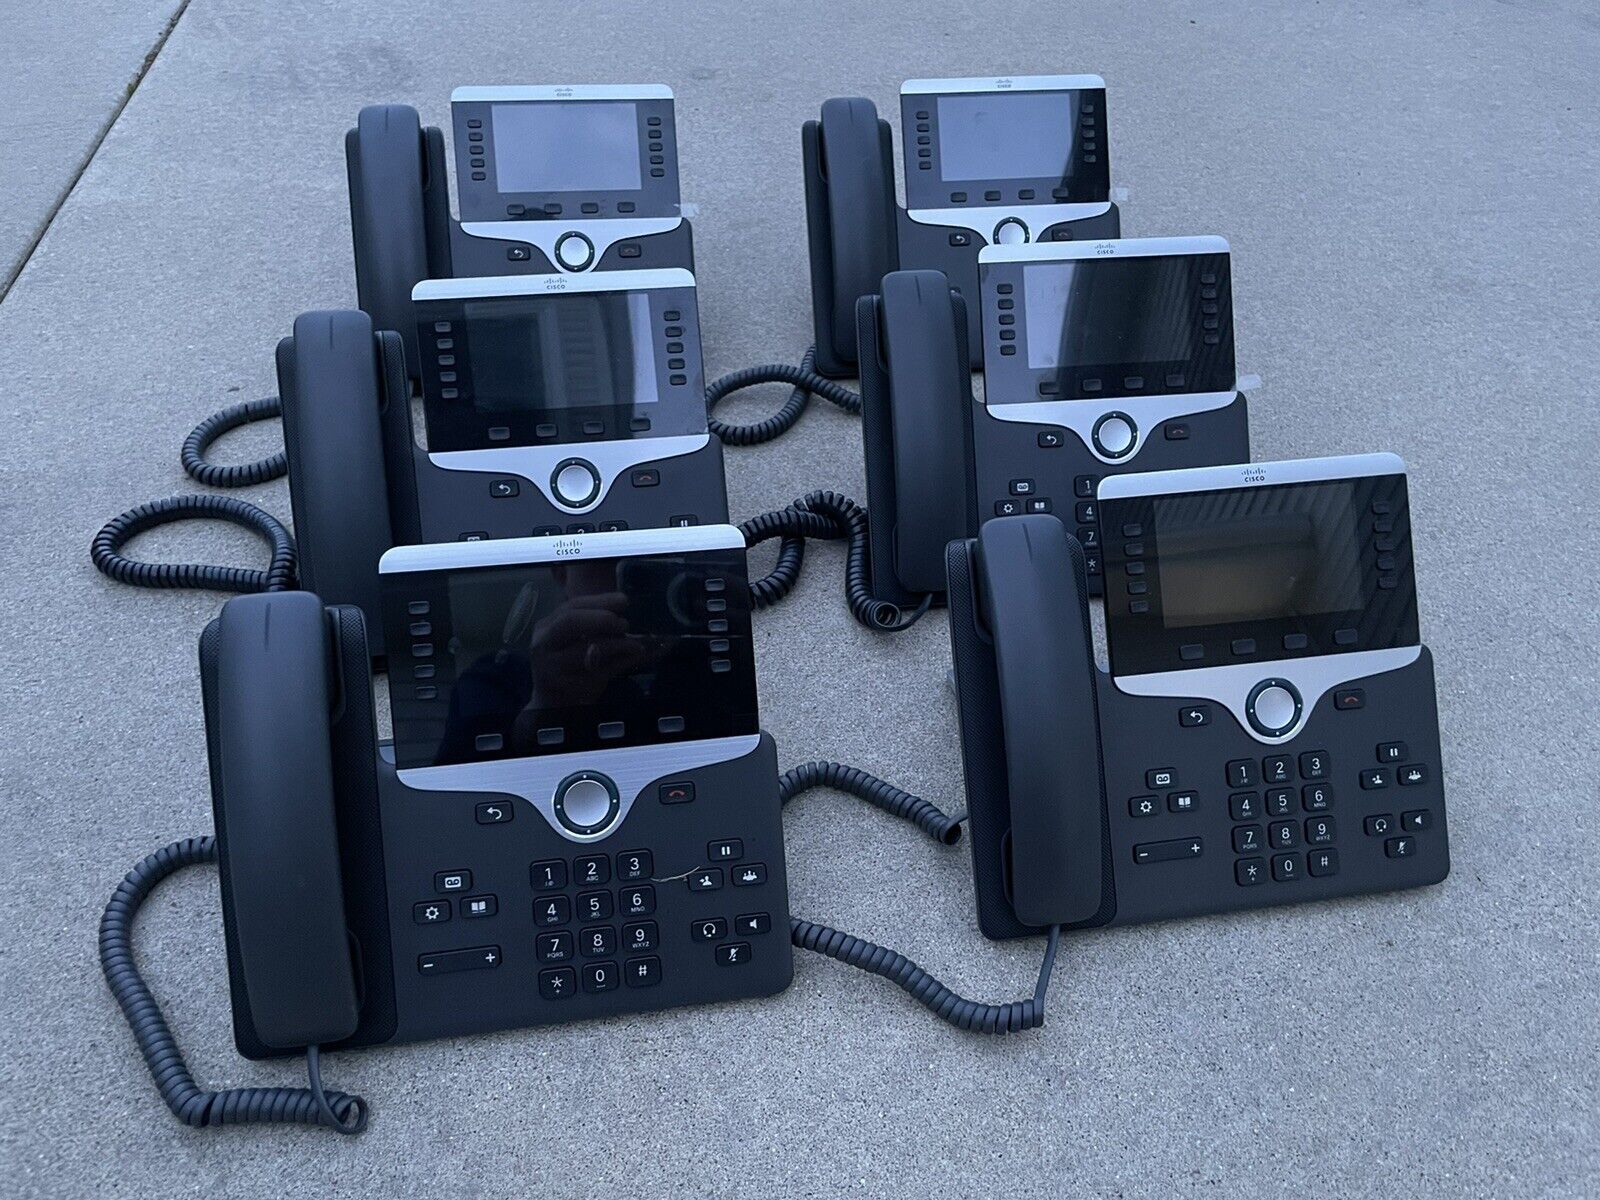 Lot of (6) Cisco CP-8851 VoIP PoE IP Color Display Business Phones